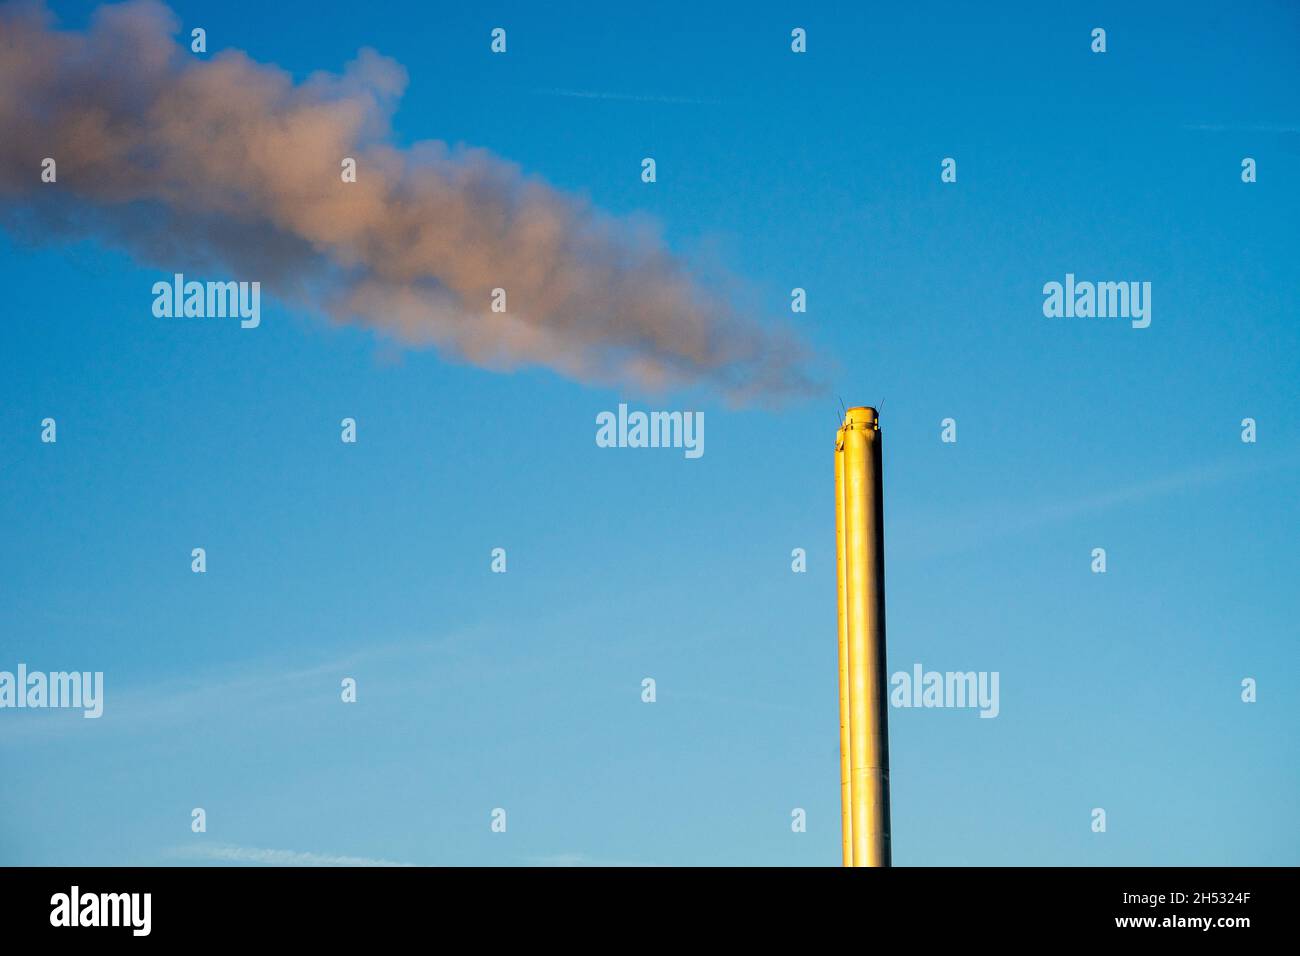 Smoke from industrial stack Stock Photo